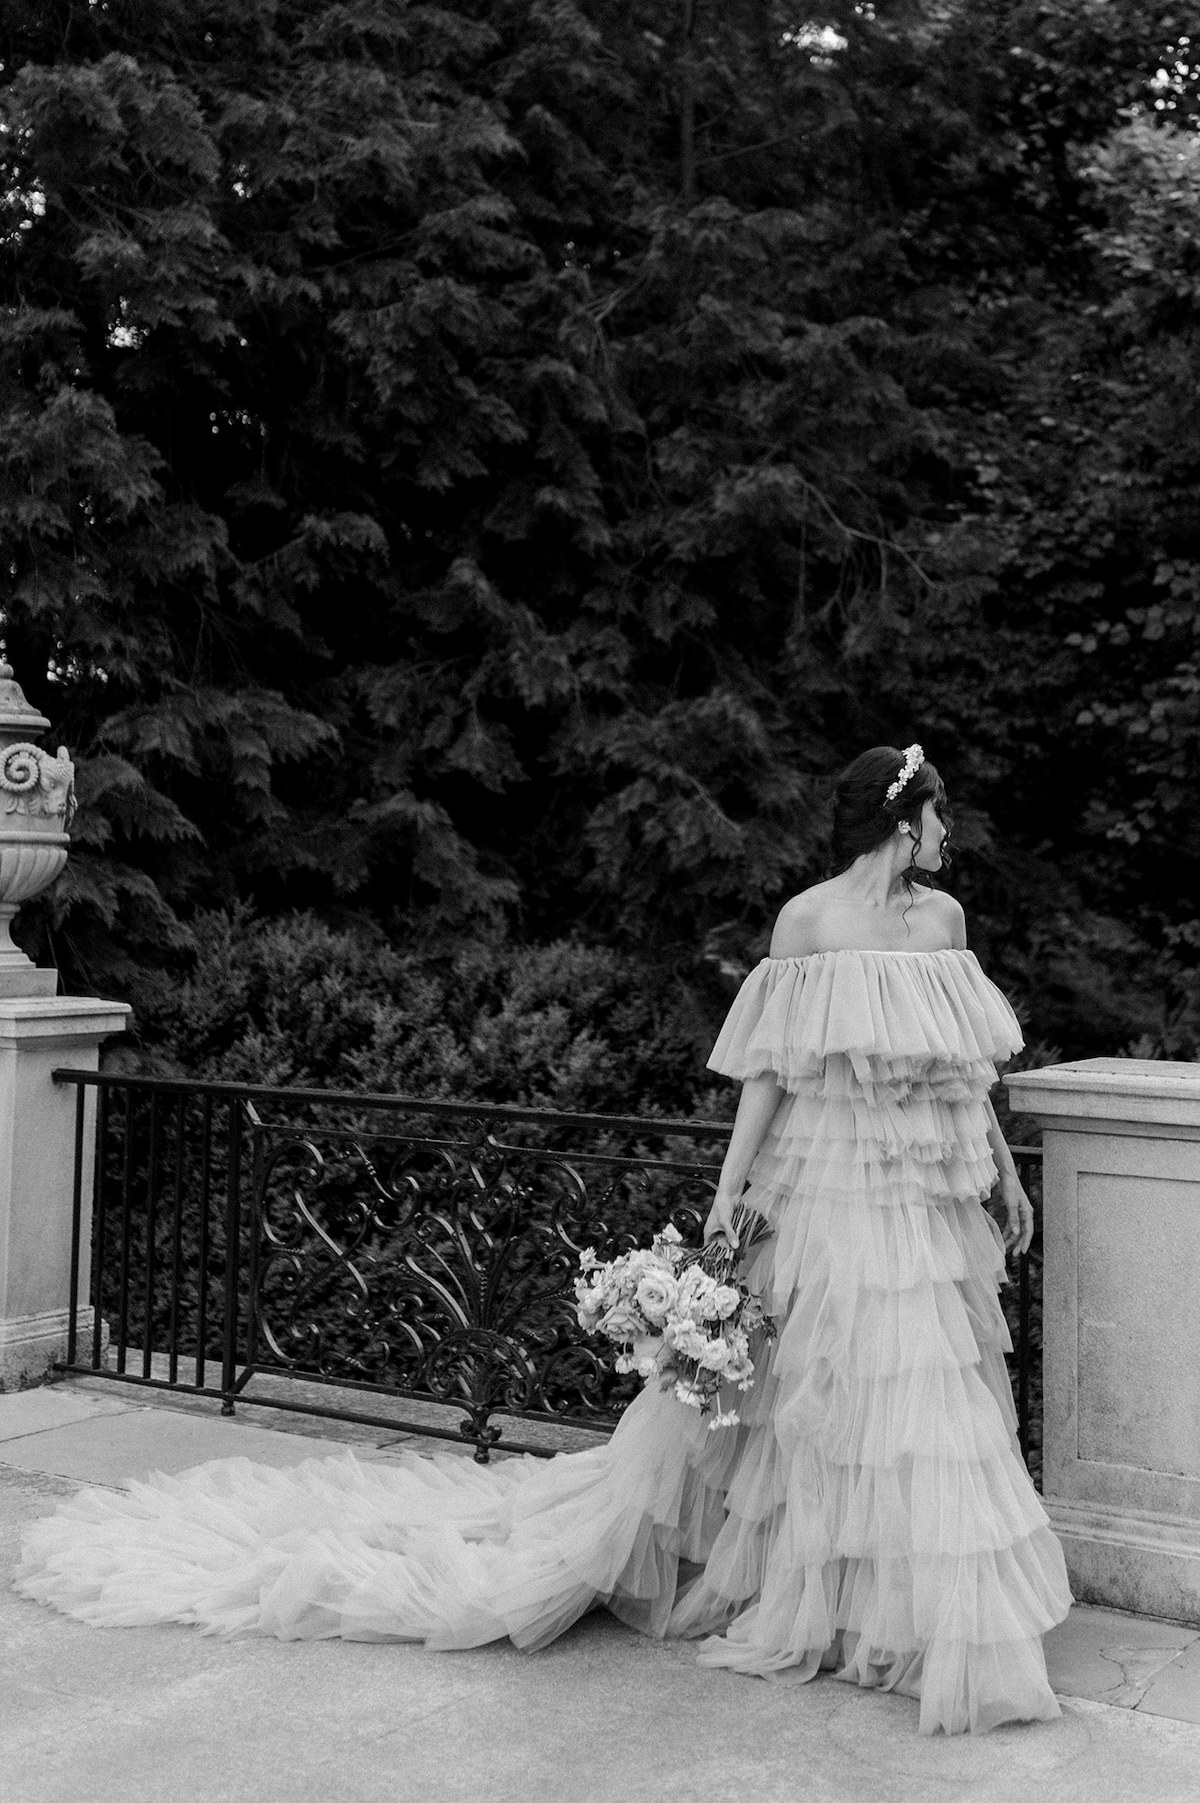 Karla's elegance is beautifully captured in black and white, the tiered mauve couture gown cascading gracefully as she stands in Longwood Gardens.